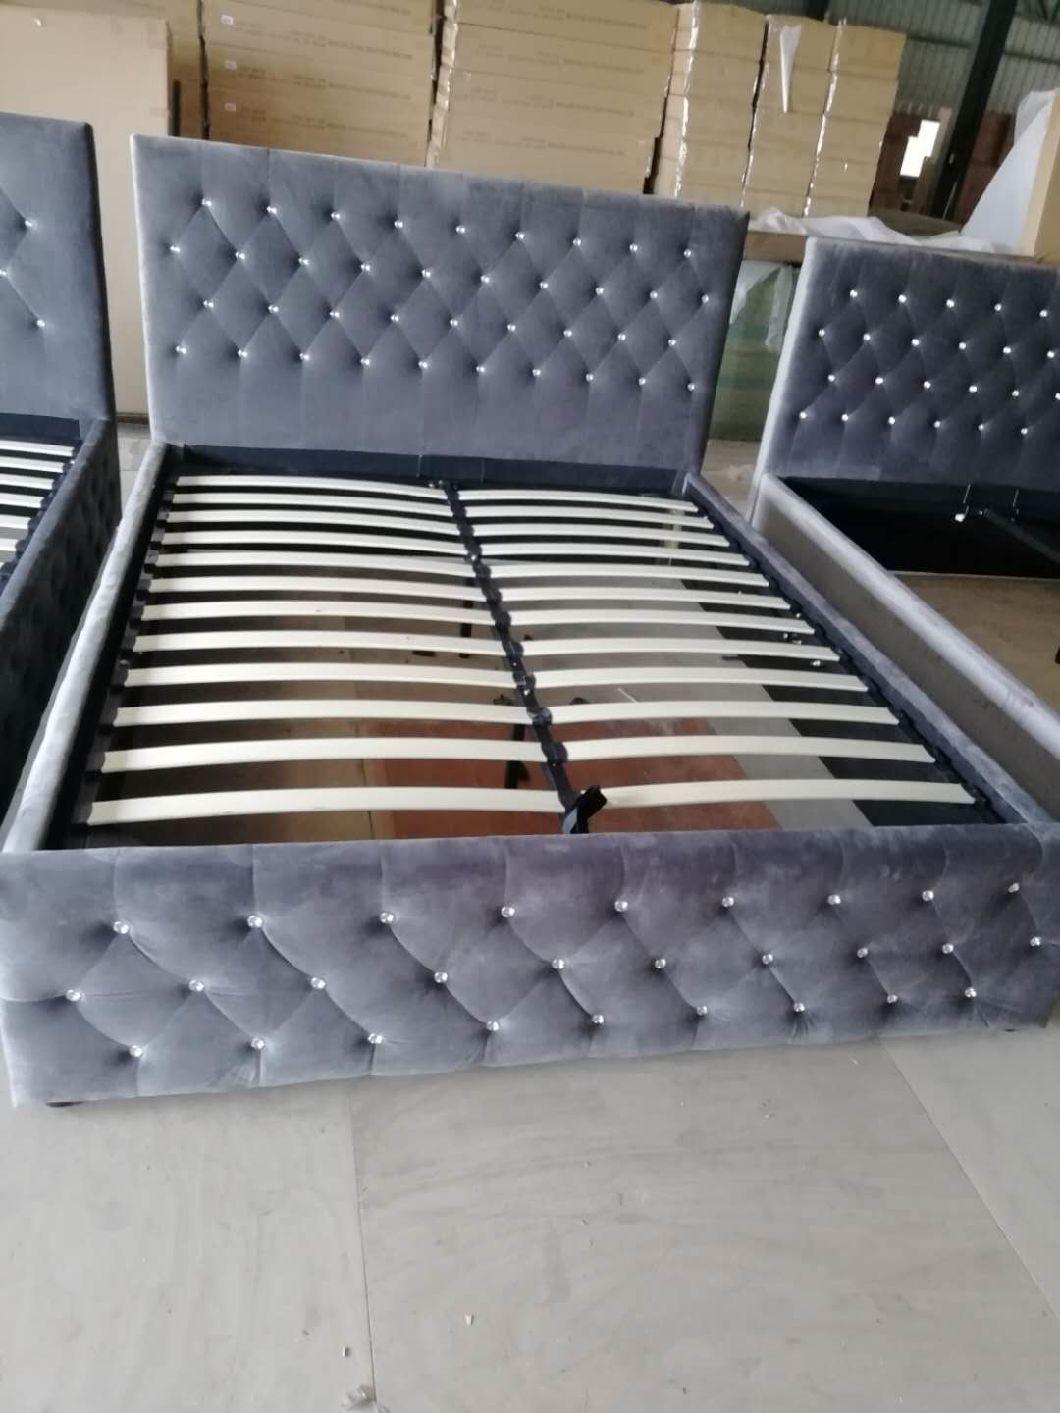 Soft Comfortable Leather Double Bed